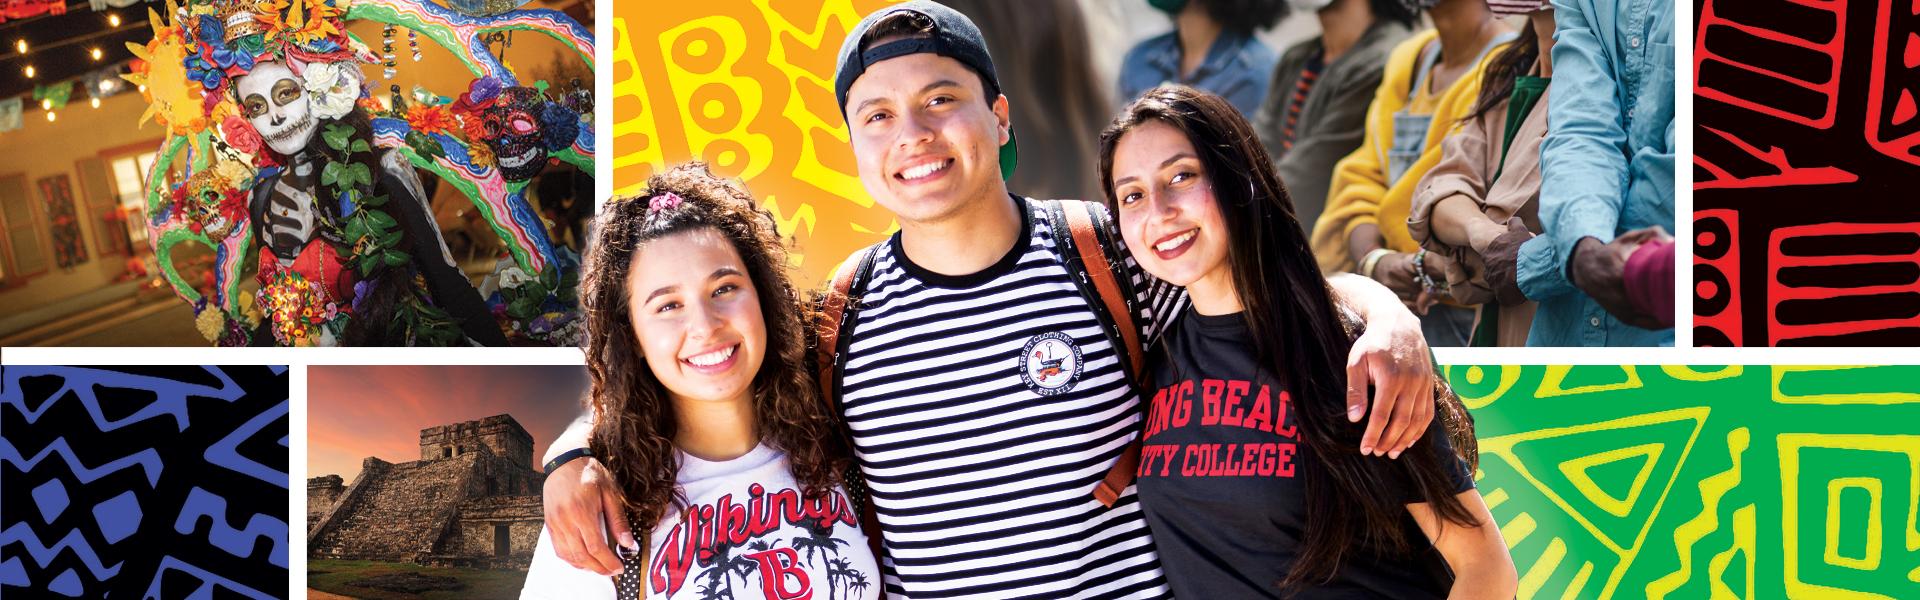 A group of Latinx college students standing together.